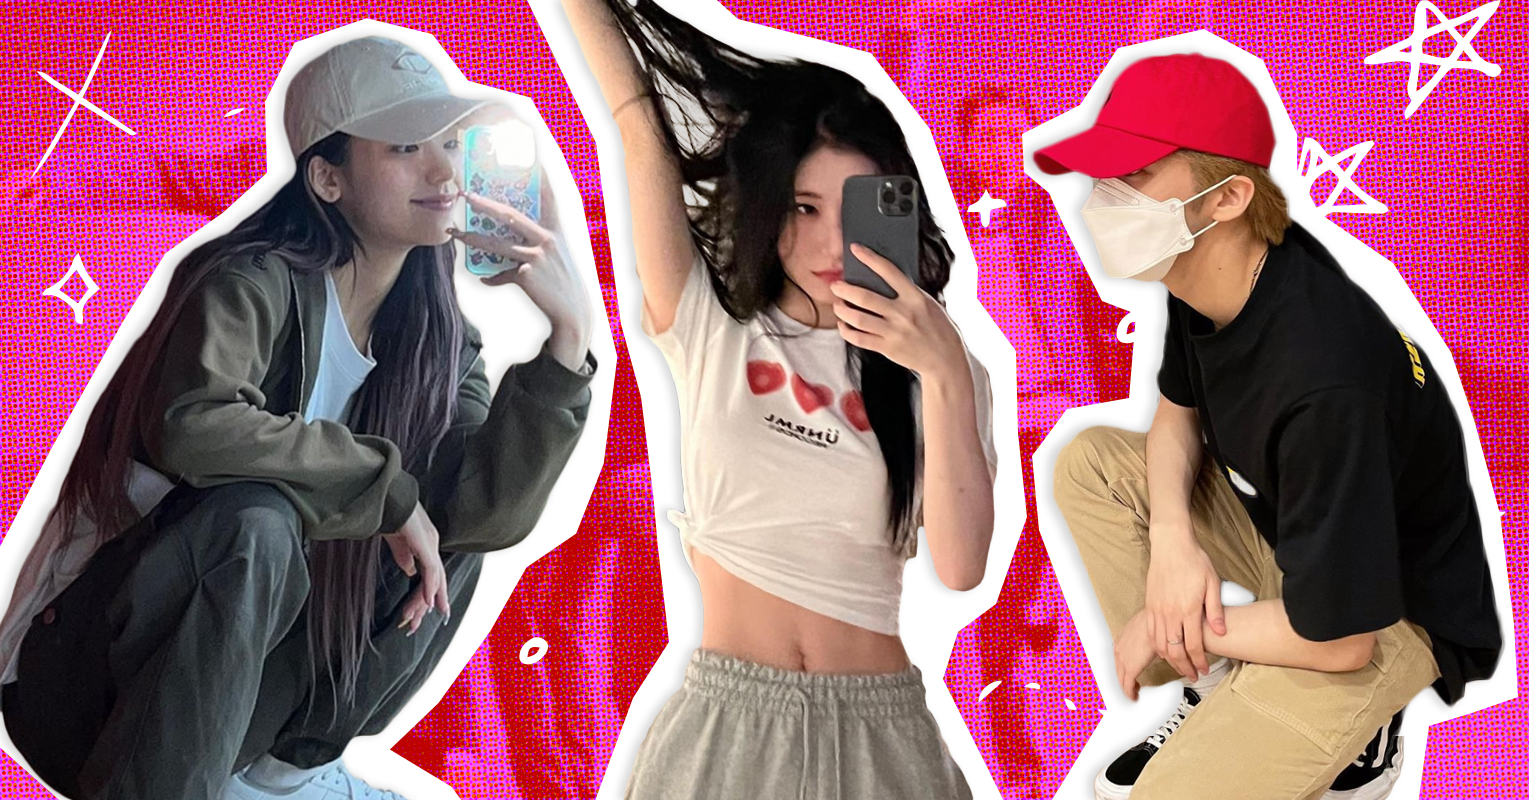 Kpop Girls' Style — - Neon Sport Outfit Ideas - 1st Outfit: Top /